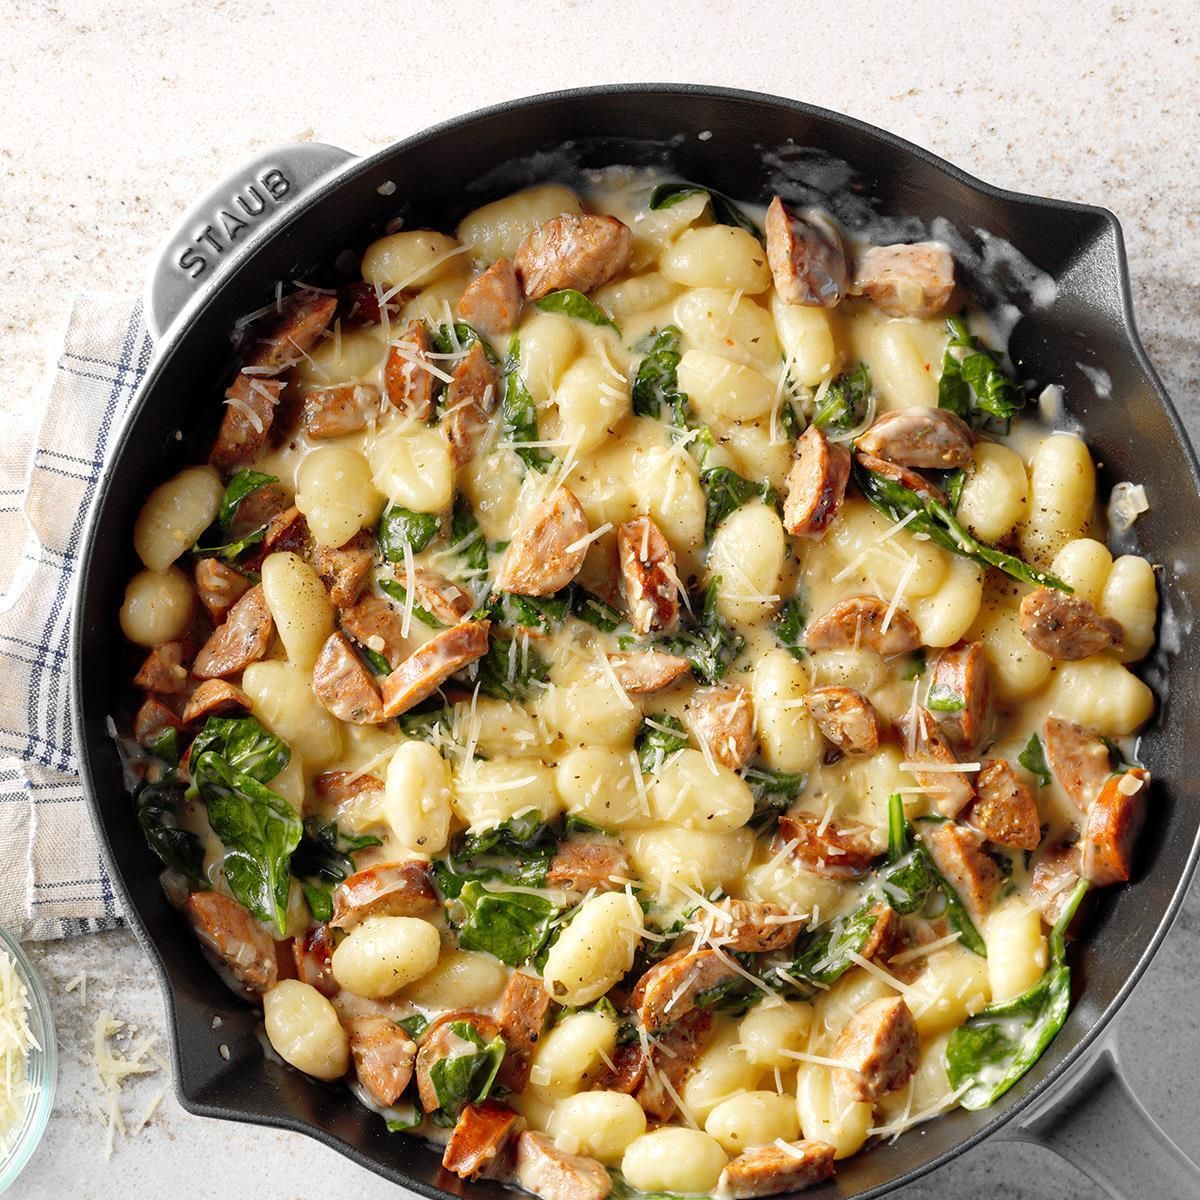 Scrumptious gnocchi with spinach and chicken sausage in a black skillet.